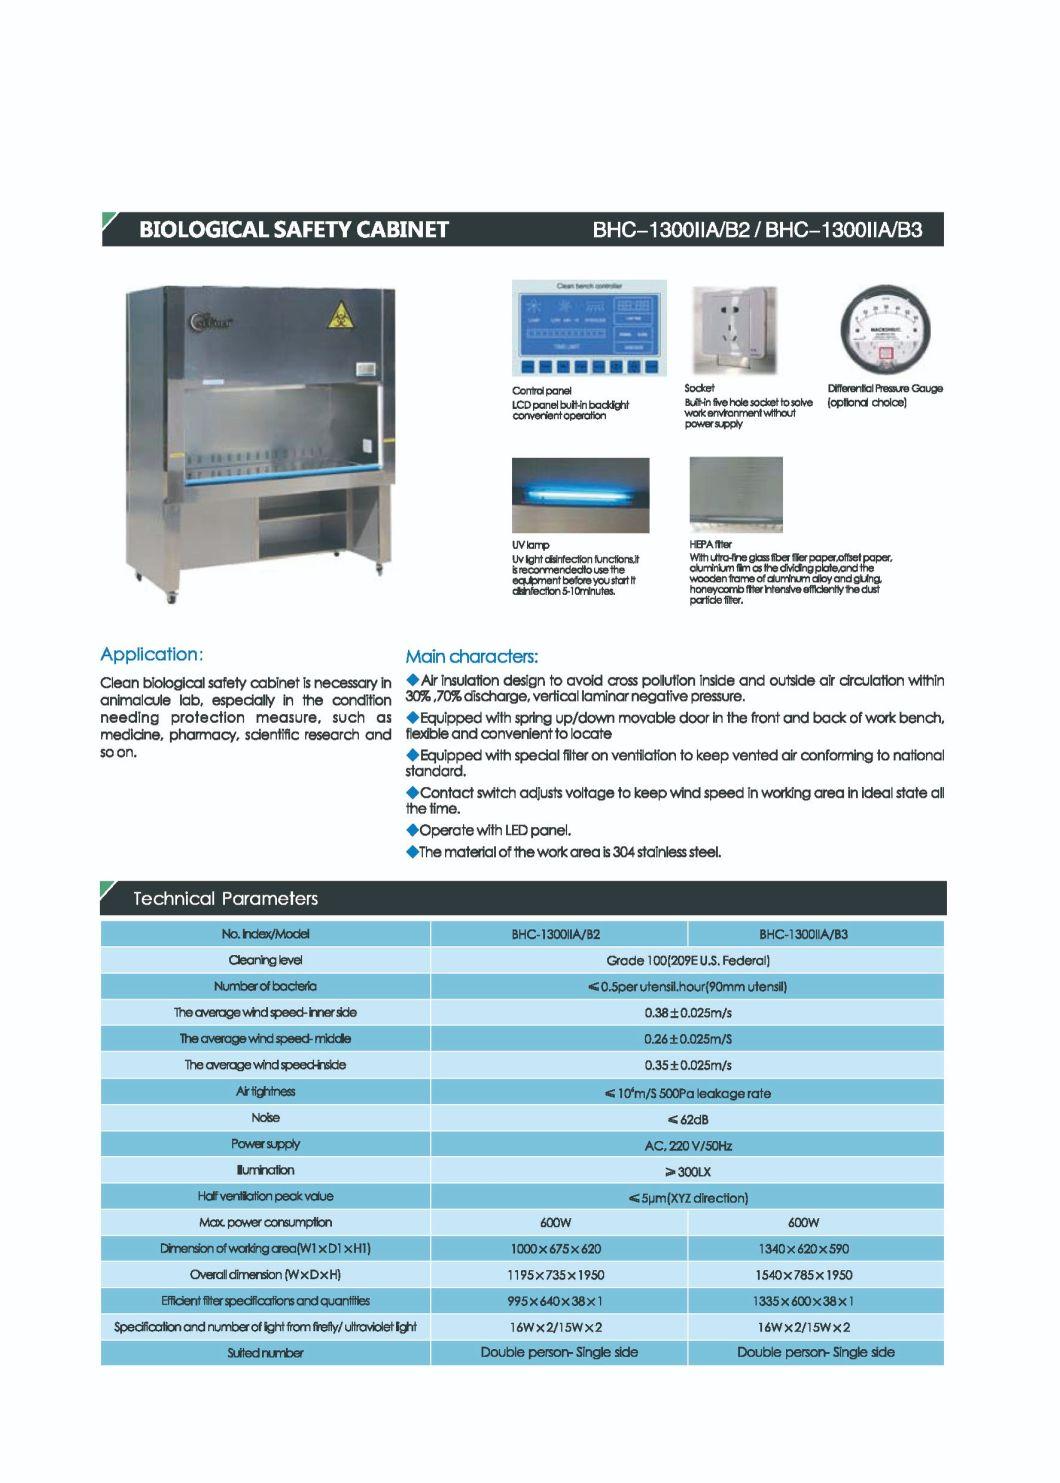 Class II Biological Safety Cabinet Biosafety Cabinets